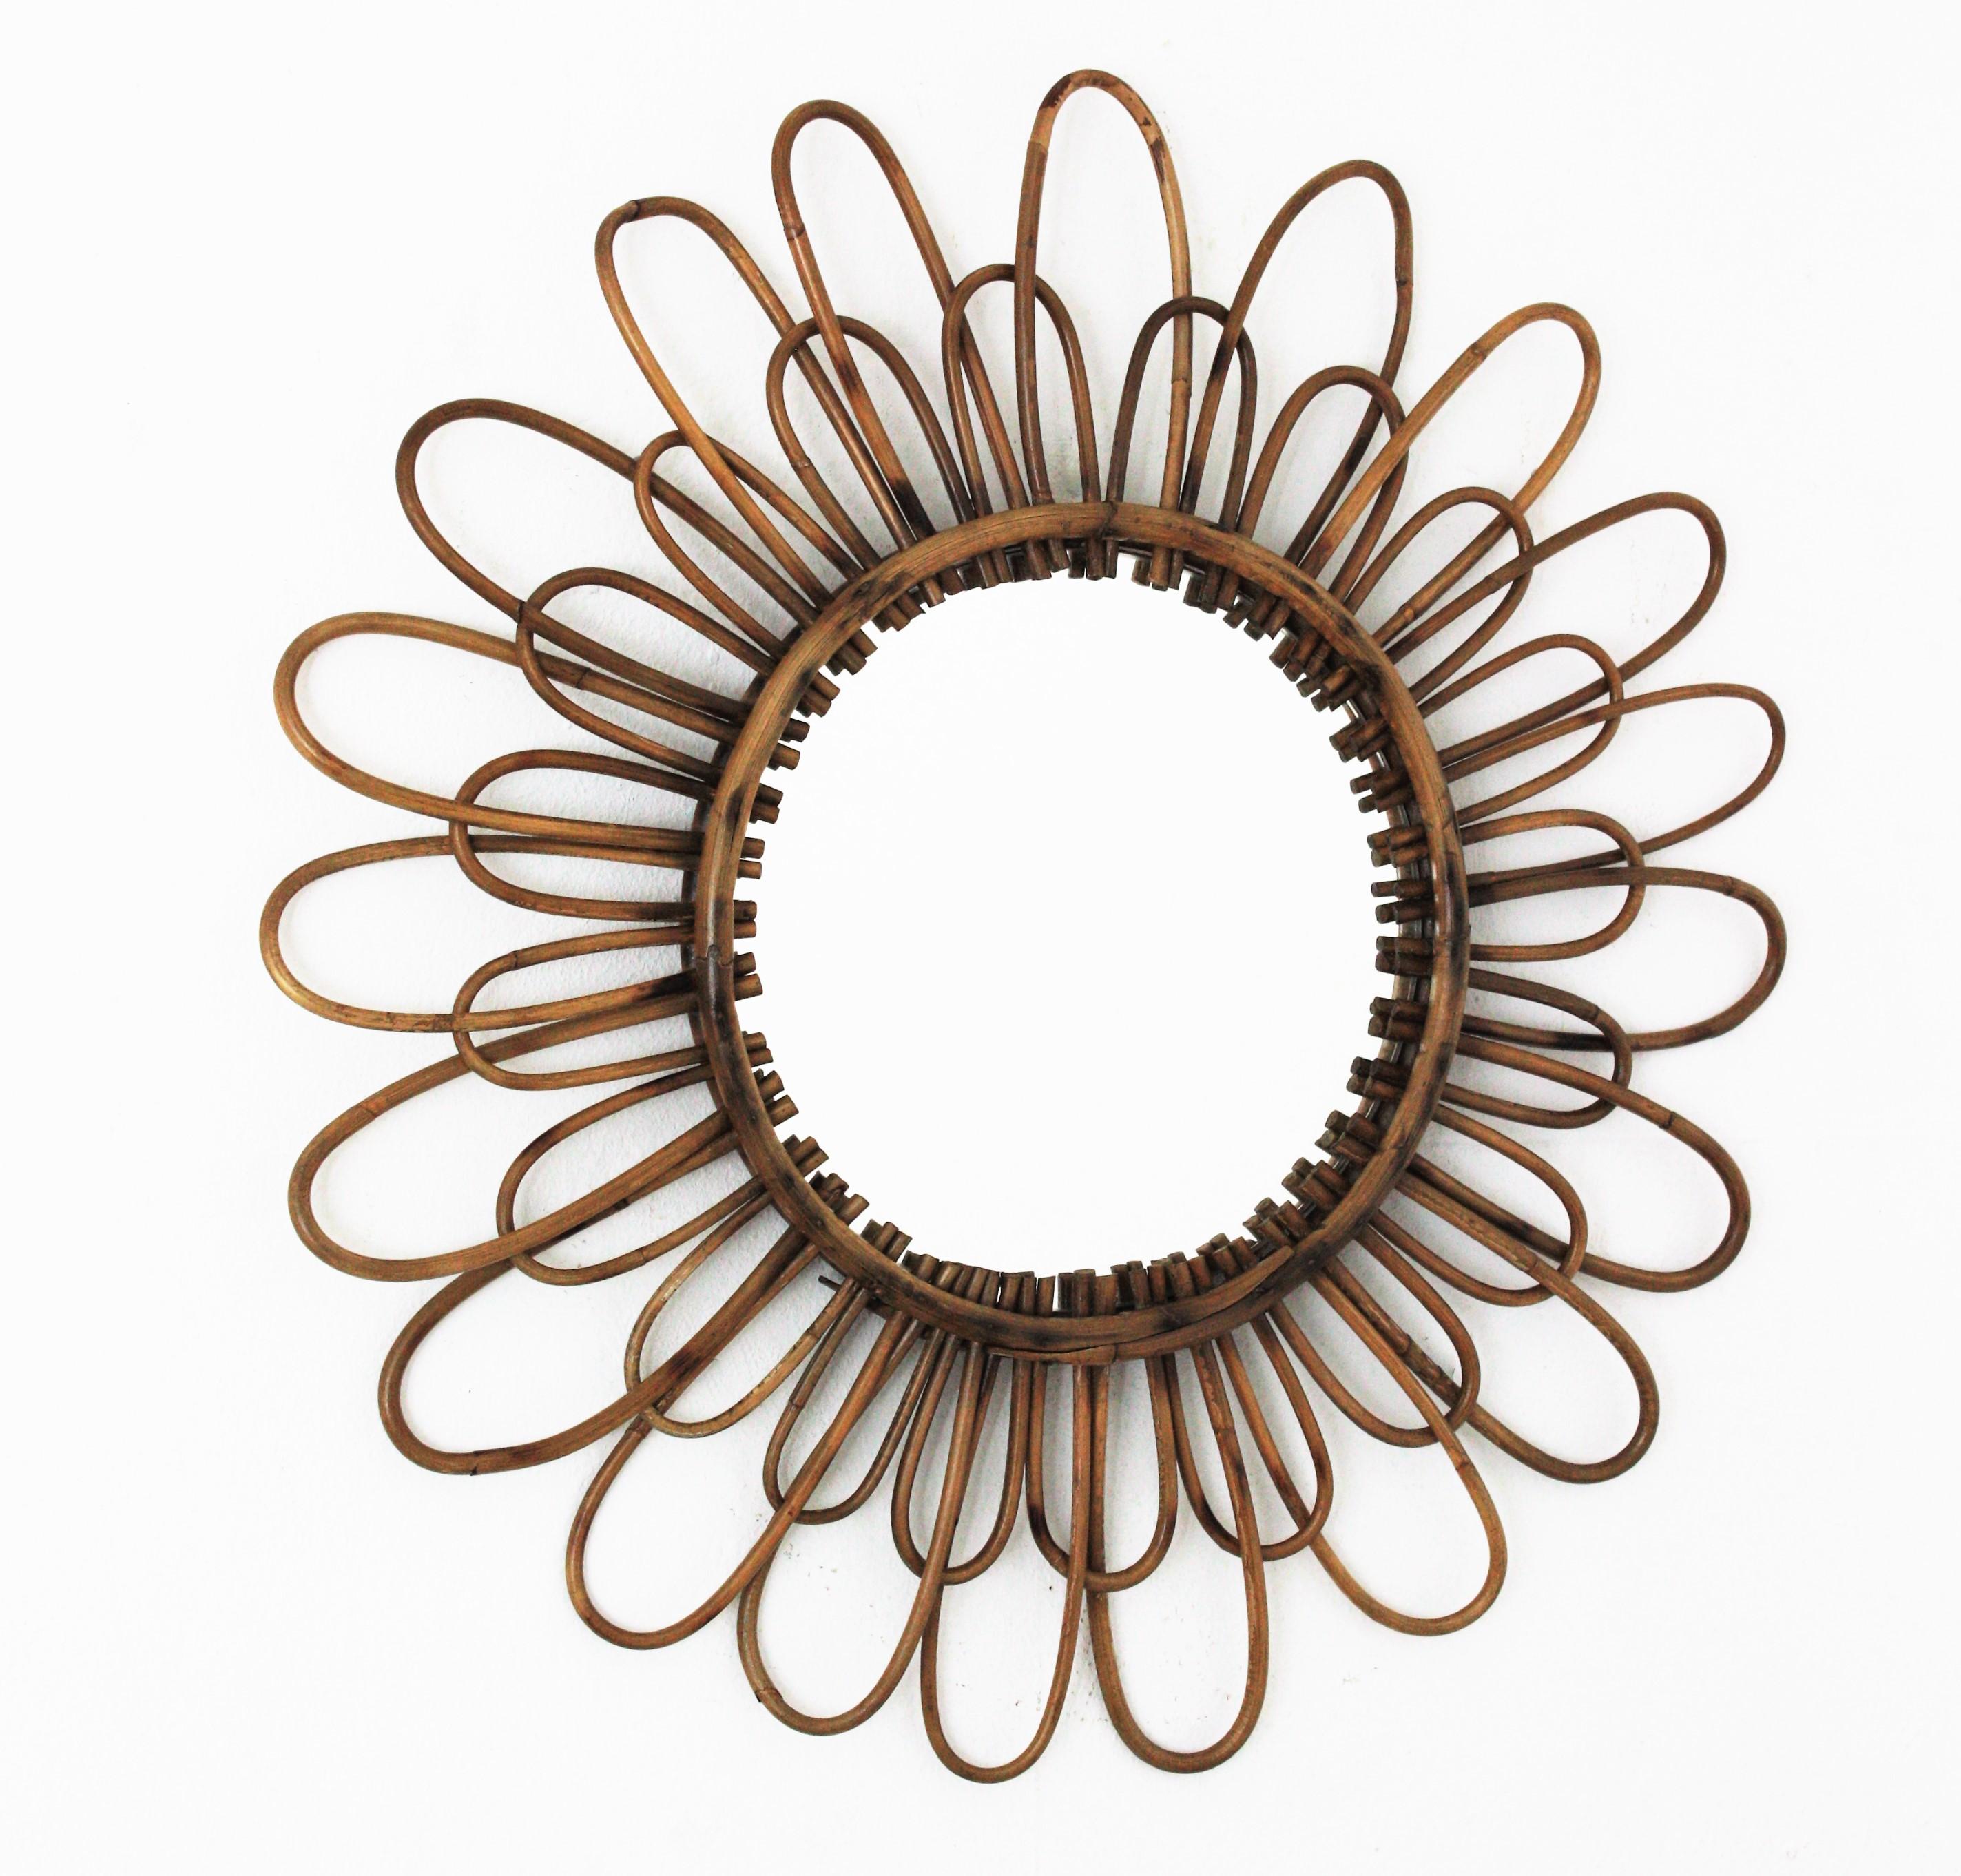 French 1960s handcrafted rattan double layered flower shaped mirror
A lovely Mediterranean style handcrafted rattan flower shaped mirror with two layers of petals in two sizes and pyrography accents.
Beautiful to place alone and interesting as a